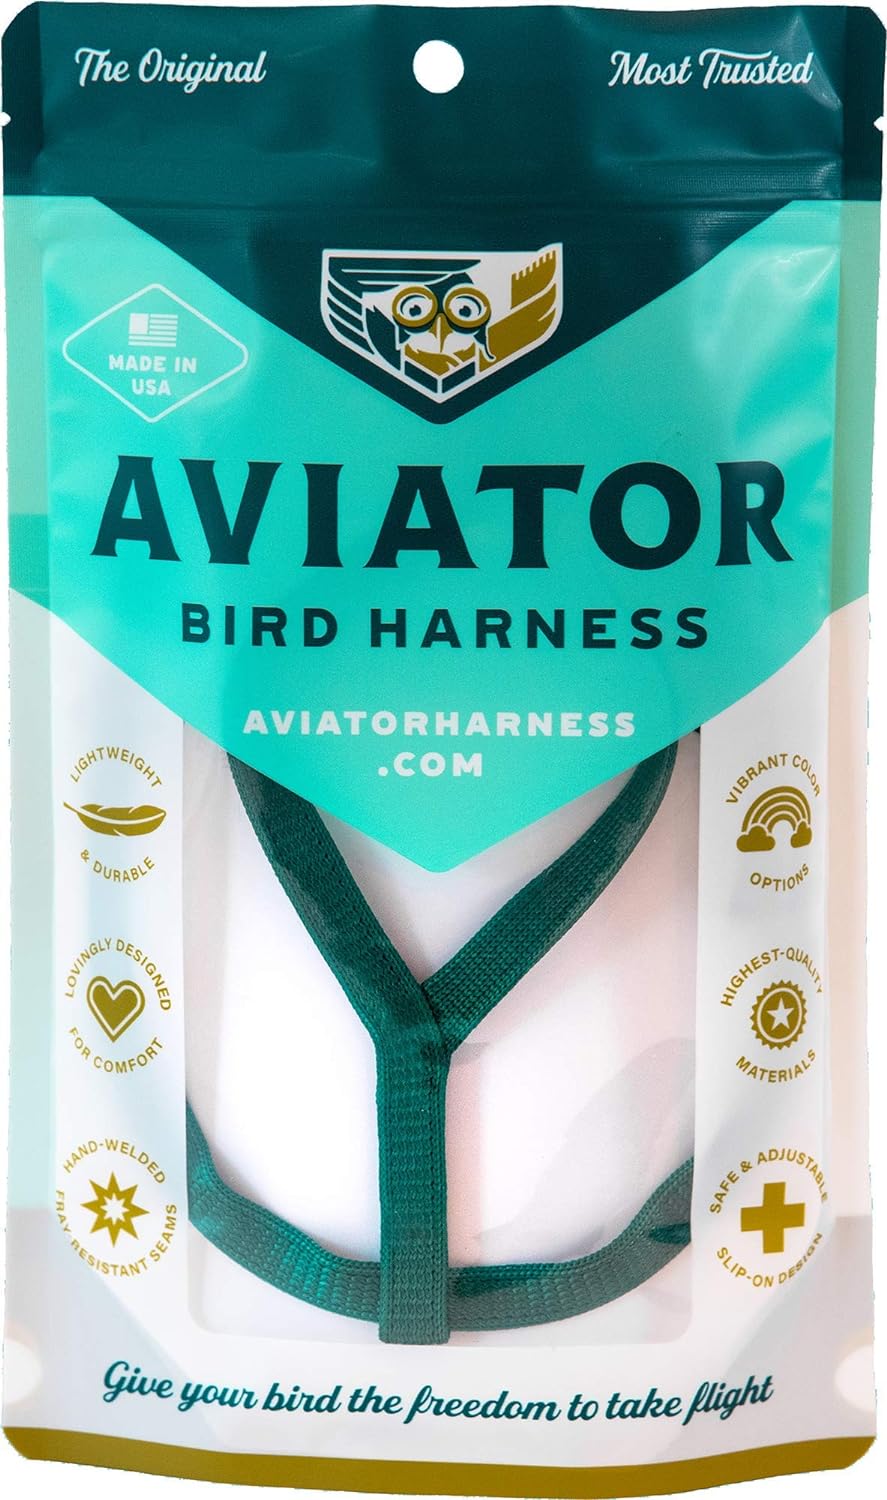 The AVIATOR Pet Bird Harness and Leash: X-Small Green Made in America